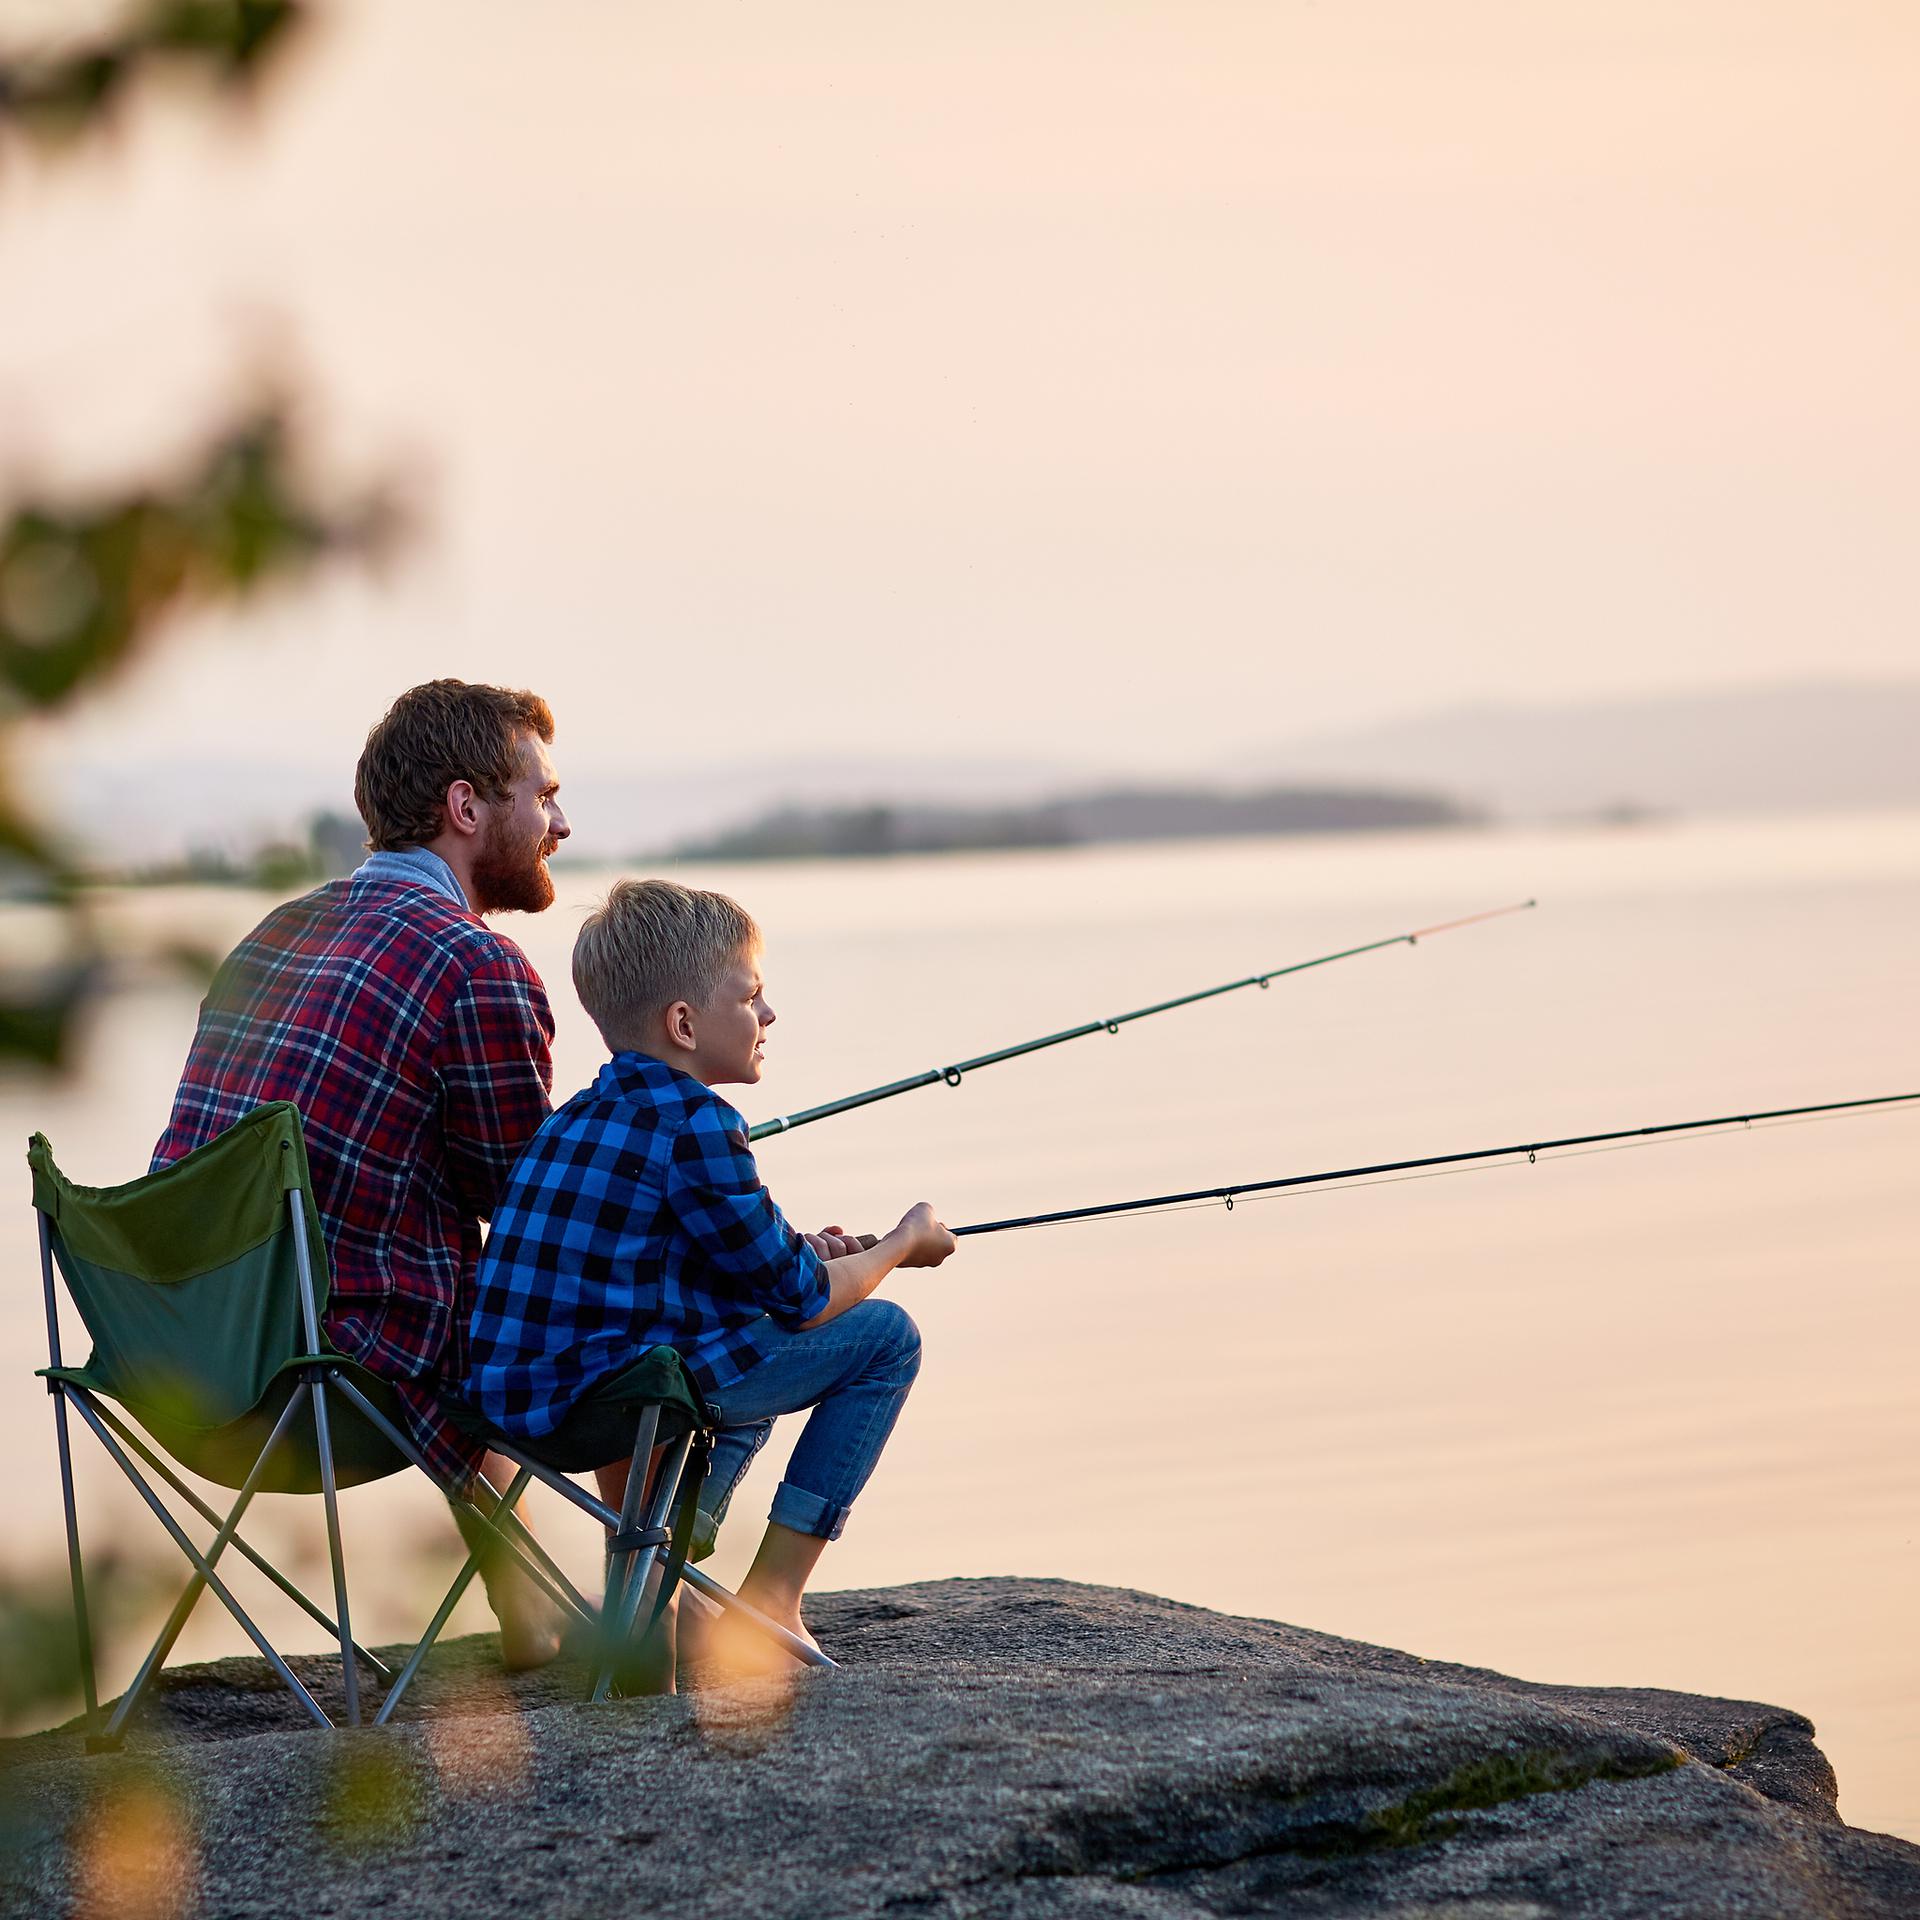 Senior man sitting on a beach chair with a fishing rod Stock Photo